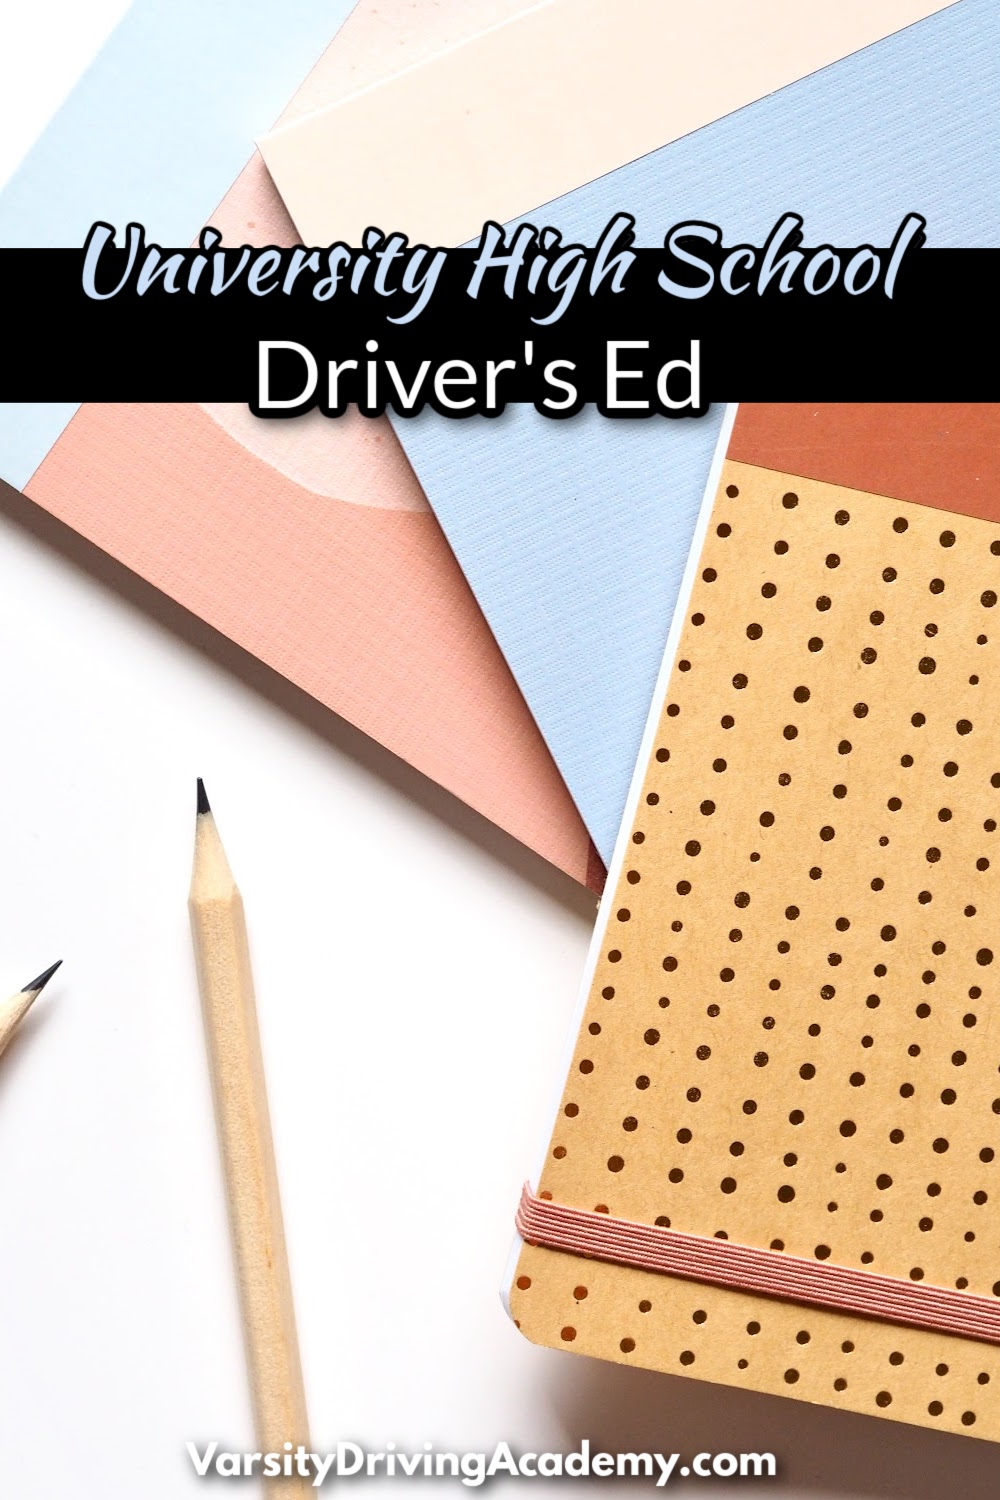 Varsity Driving Academy offers the best University High School drivers ed where teens will learn how to drive defensively.